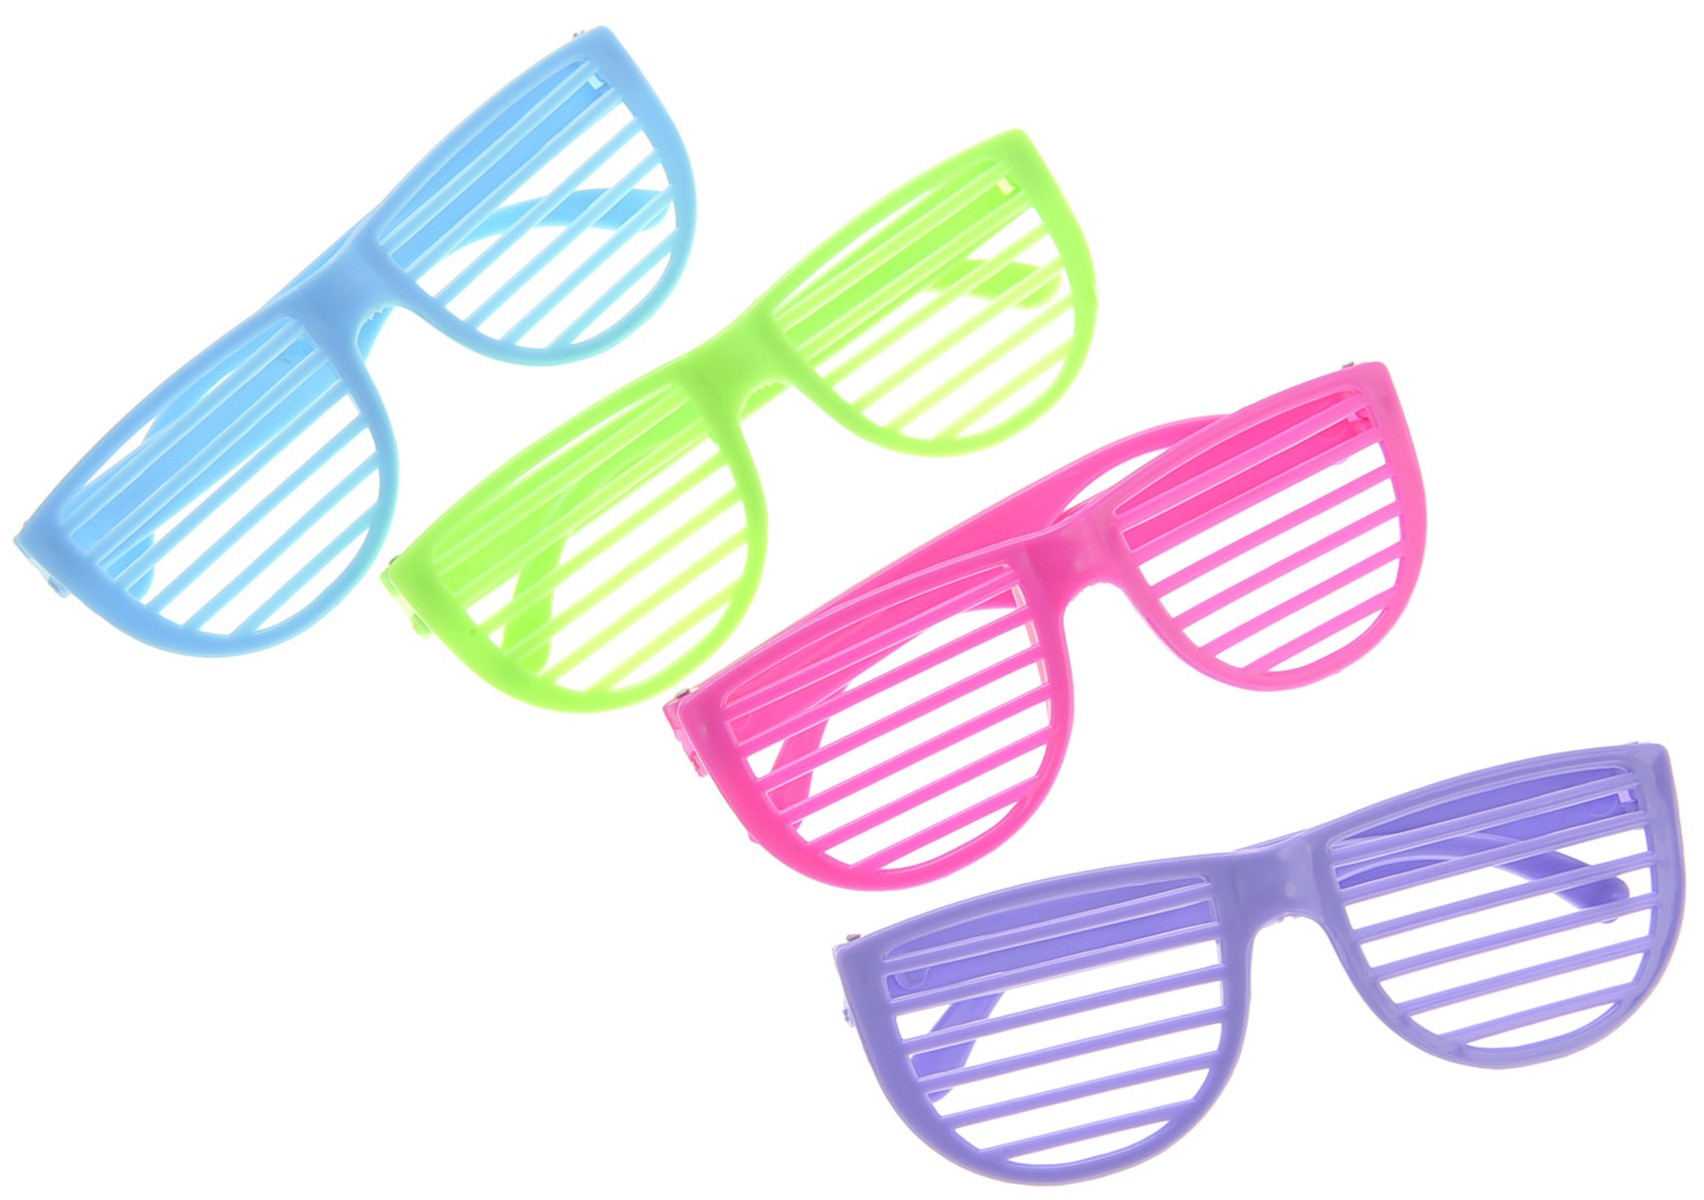 Plastic Shutter Shades Glasses (12Pairs/PK, Purple,Blue,Green, And Pink)